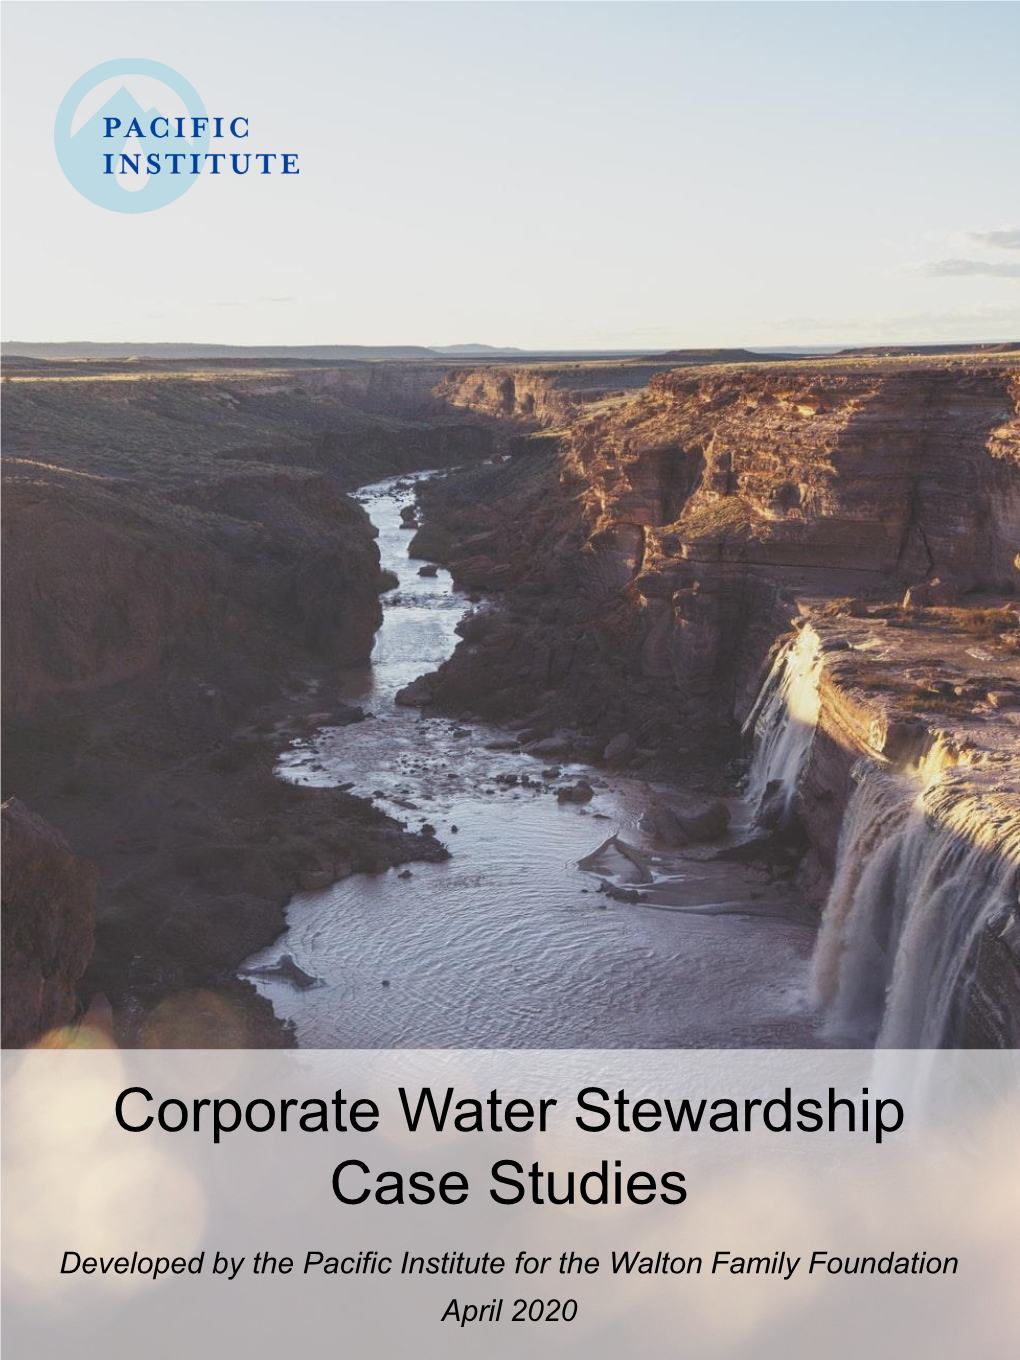 Collection of Corporate Water Stewardship Case Studies